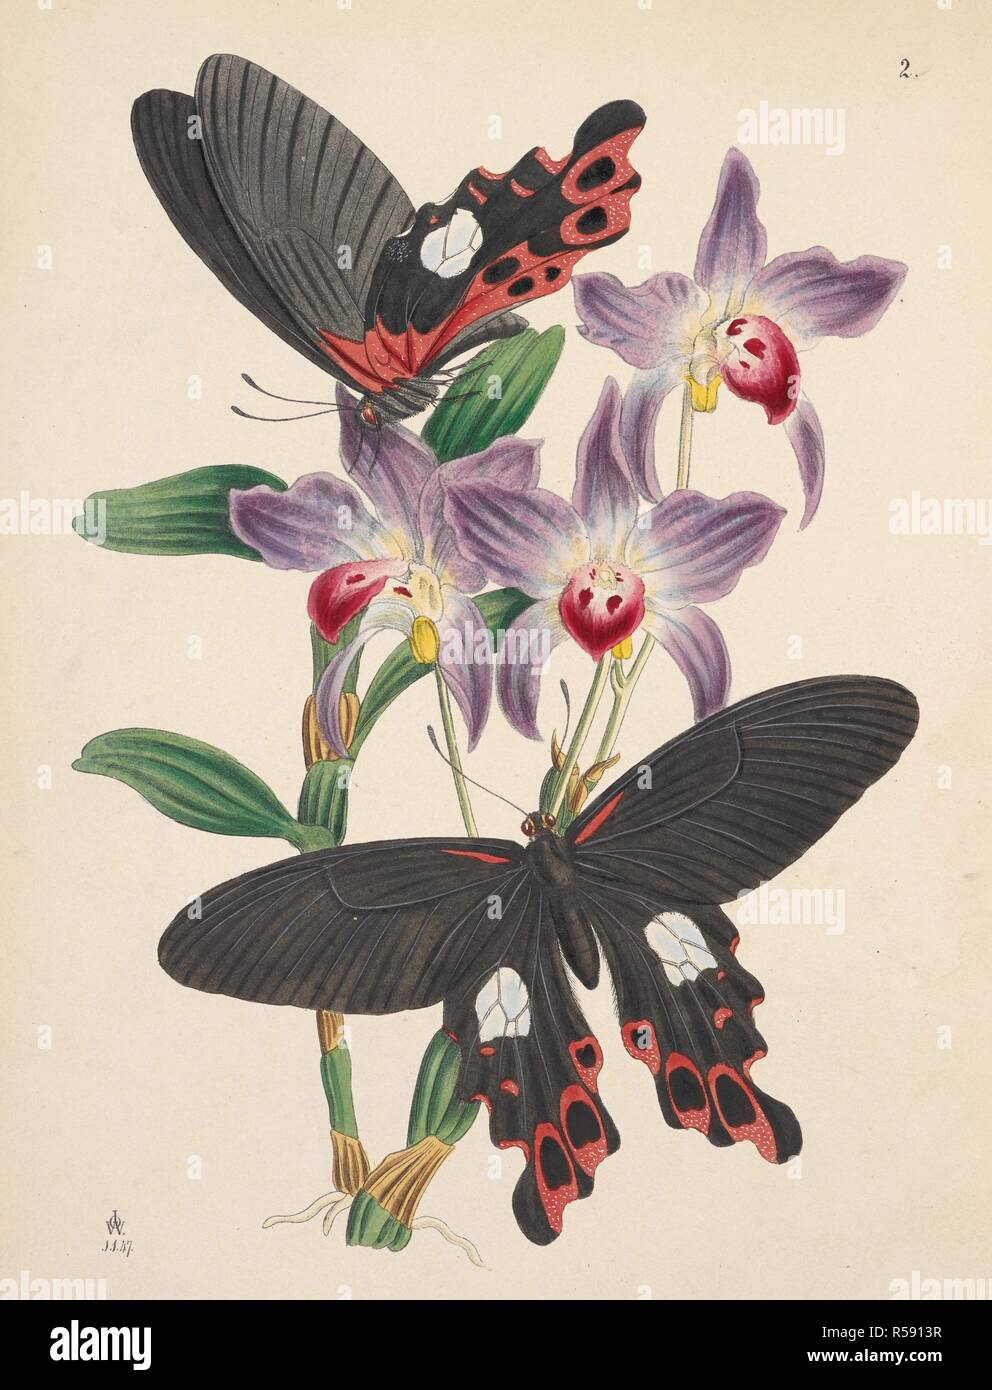 Butterfiles. PAPILIO ICARIUS. (ORDERâ€” LEPIDOPTERA. Section Diukna. Rhopalocf.ra. Bdv.)  . The Cabinet of Oriental Entomology; being a selection of some of the rarer and more beautiful species of Insects, natives of India and the adjacent islands. London, 1848. Source: 1258.k.17 plate 2. Author: Westwood, John Obediah. Stock Photo